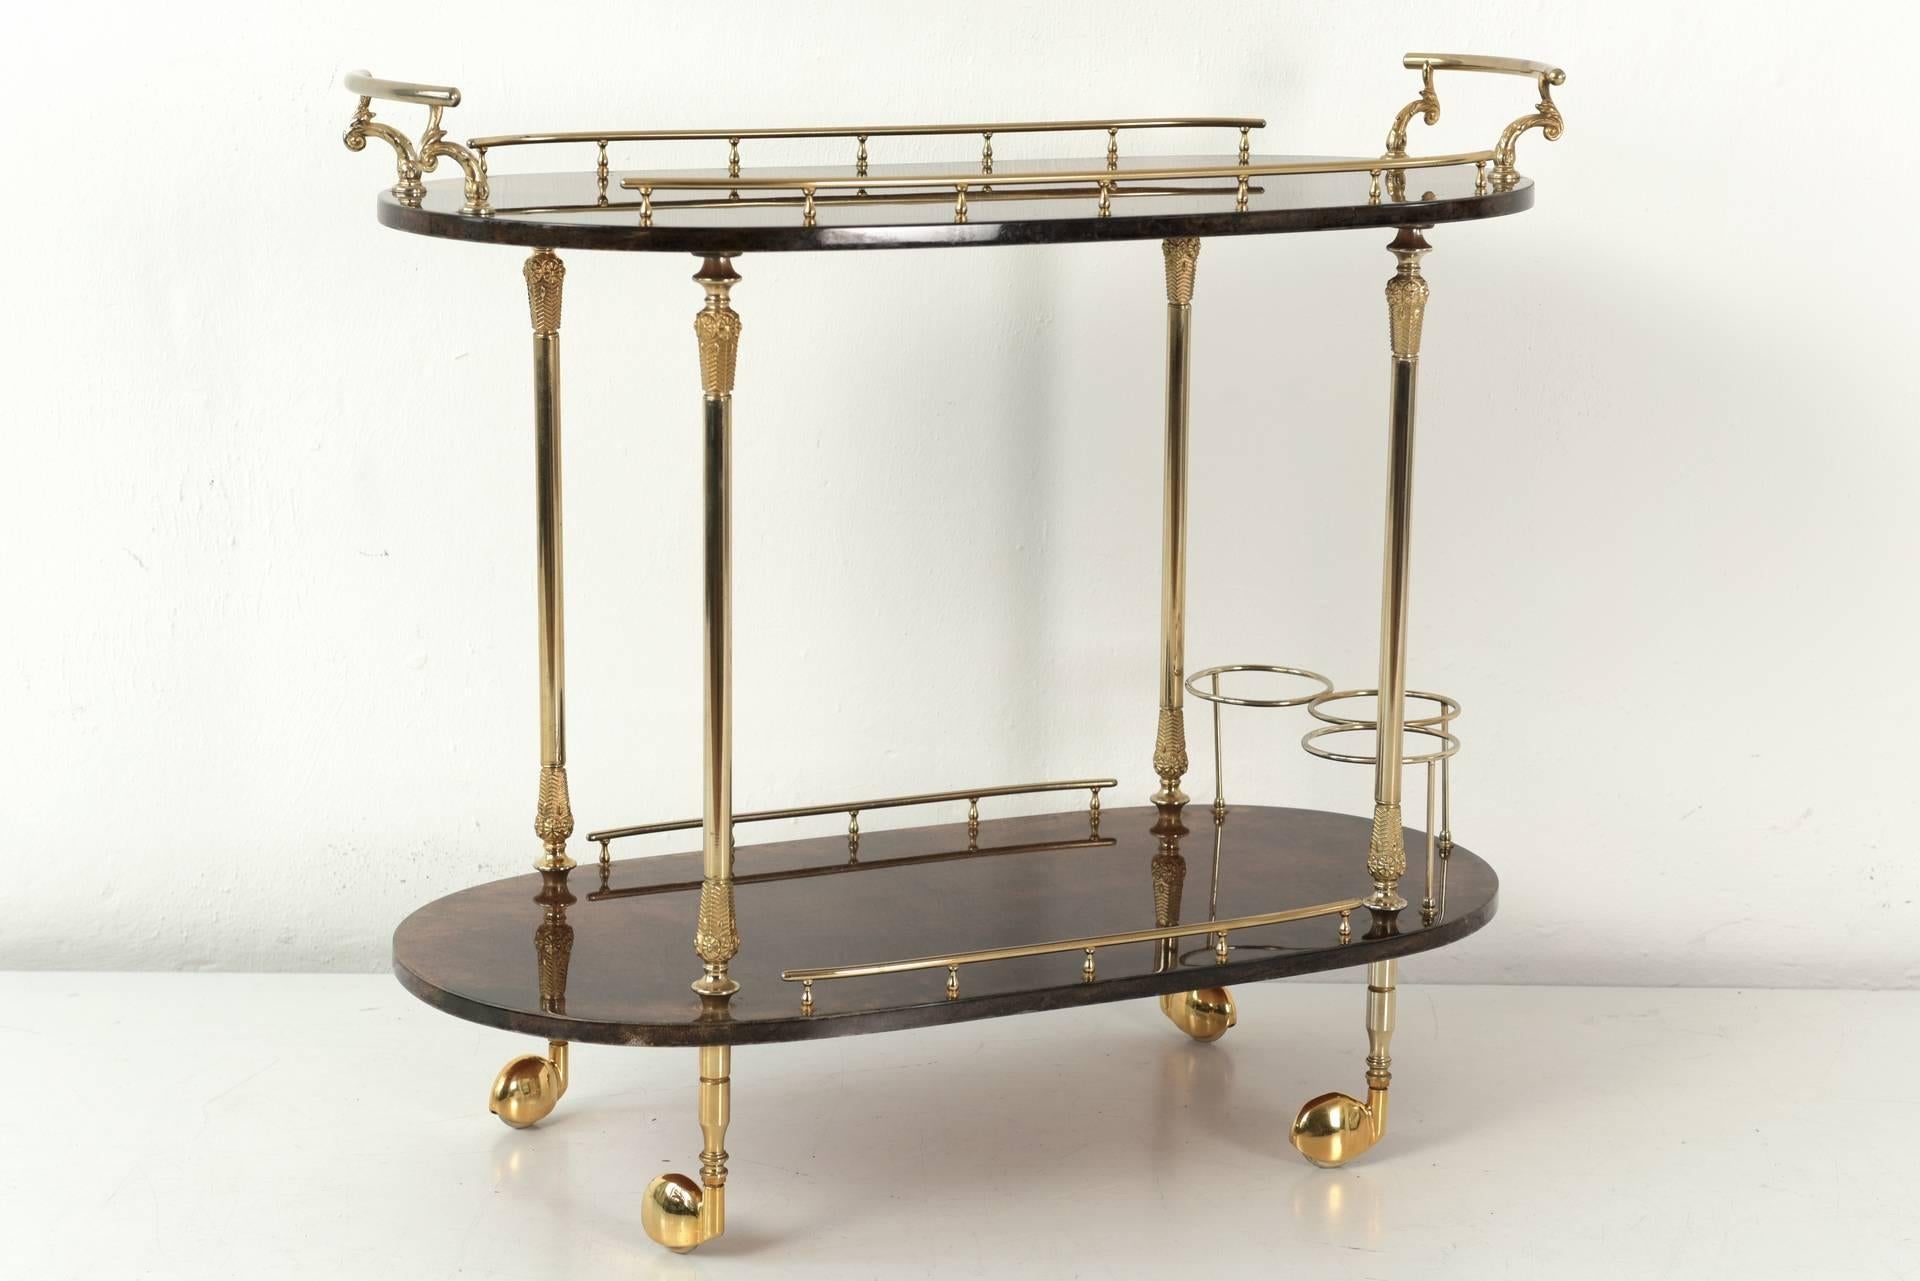 In imposing size presents this well-preserved bar cart of the manufactory Aldo Tura from Milan. Tura developed this patinated leather cover with star-durable polyester paint for the decoration of small furniture, table cabinets, etc. The combination